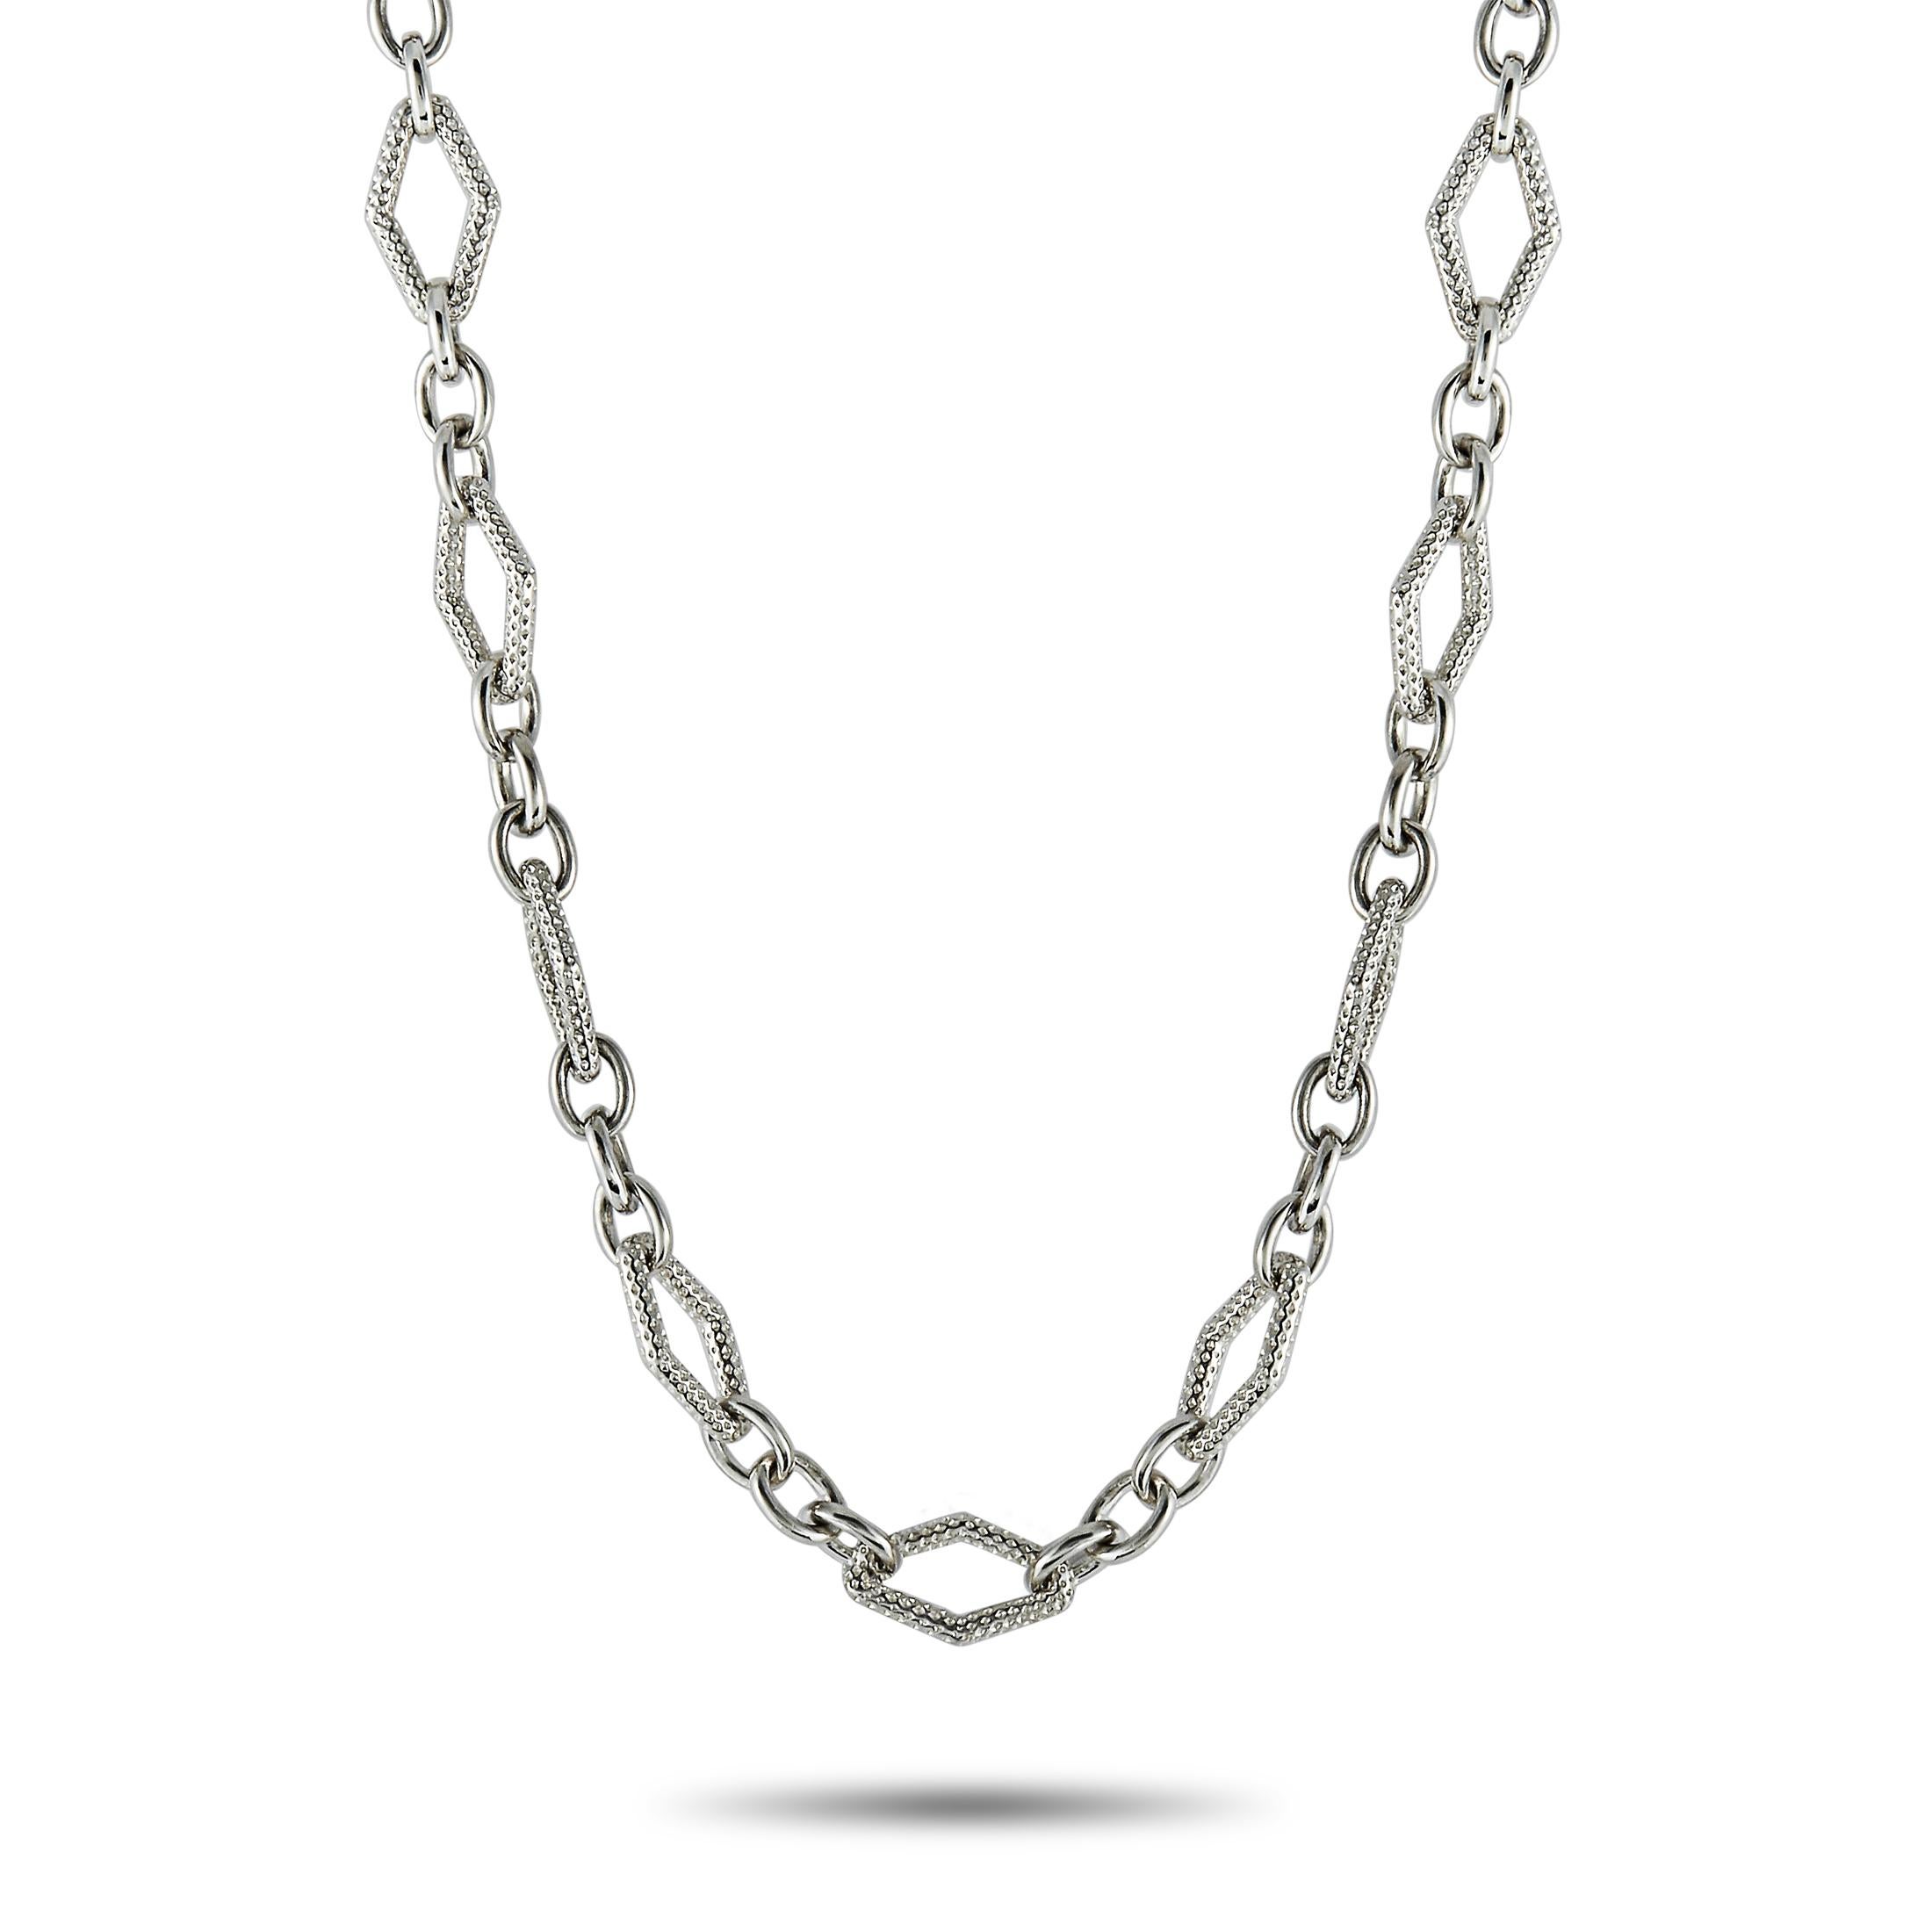 Women's or Men's Charles Krypell White Gold and Silver Diamond Chain Necklace